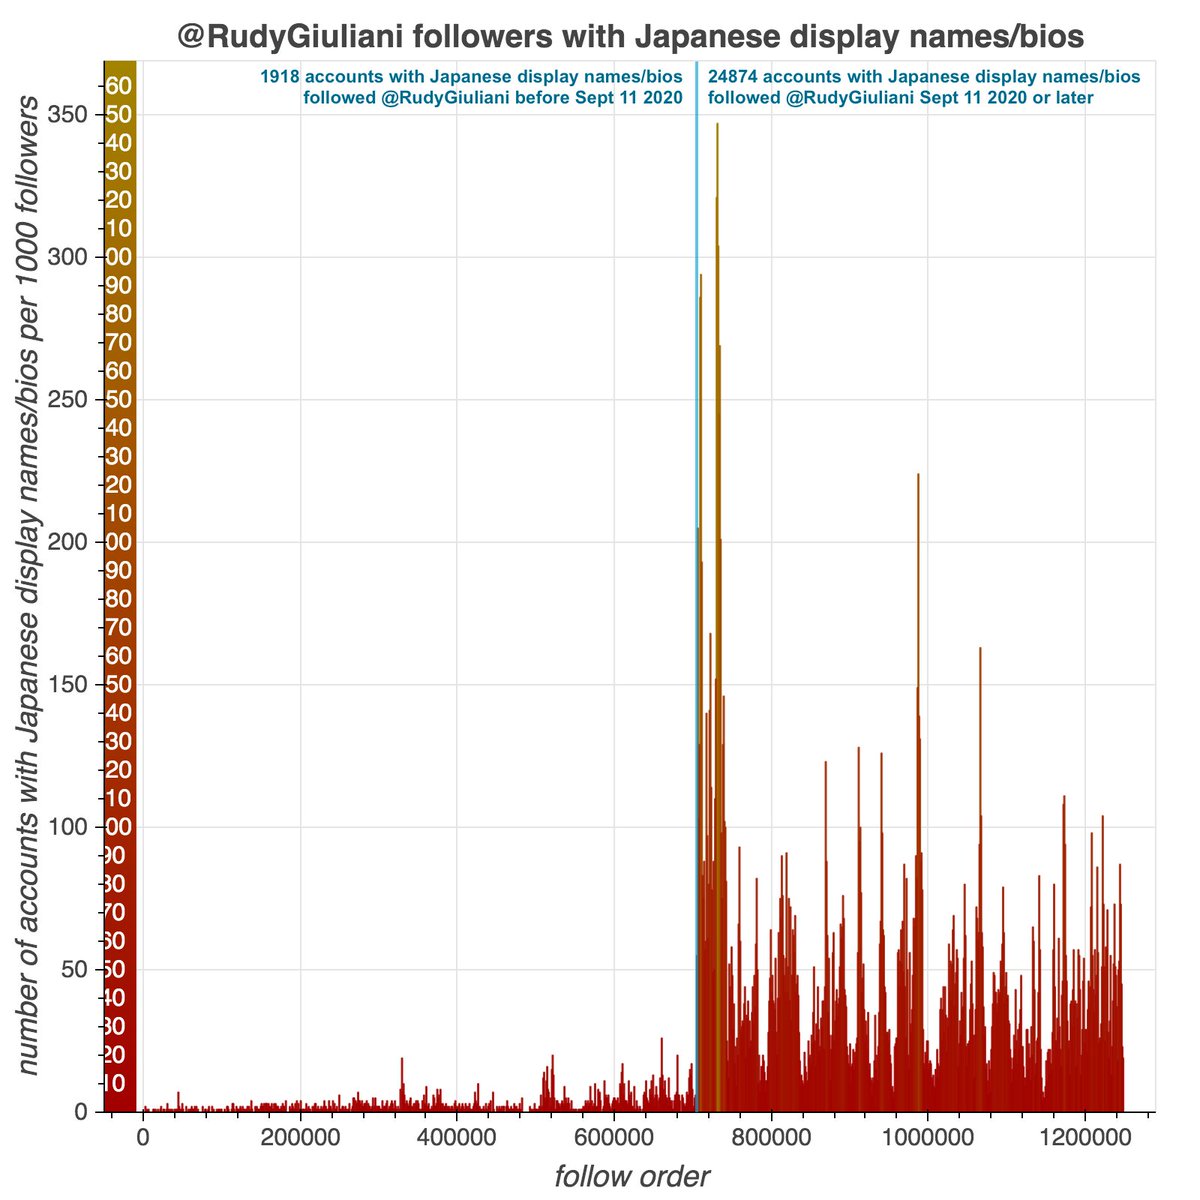 The recent influx of accounts with Japanese display names/bios also shows up in  @RudyGiuliani's followers, although it appears to have started on September 11th, 2020 (as opposed to after the November election as was the case with  @SidneyPowell1 and  @LLinWood's followers).